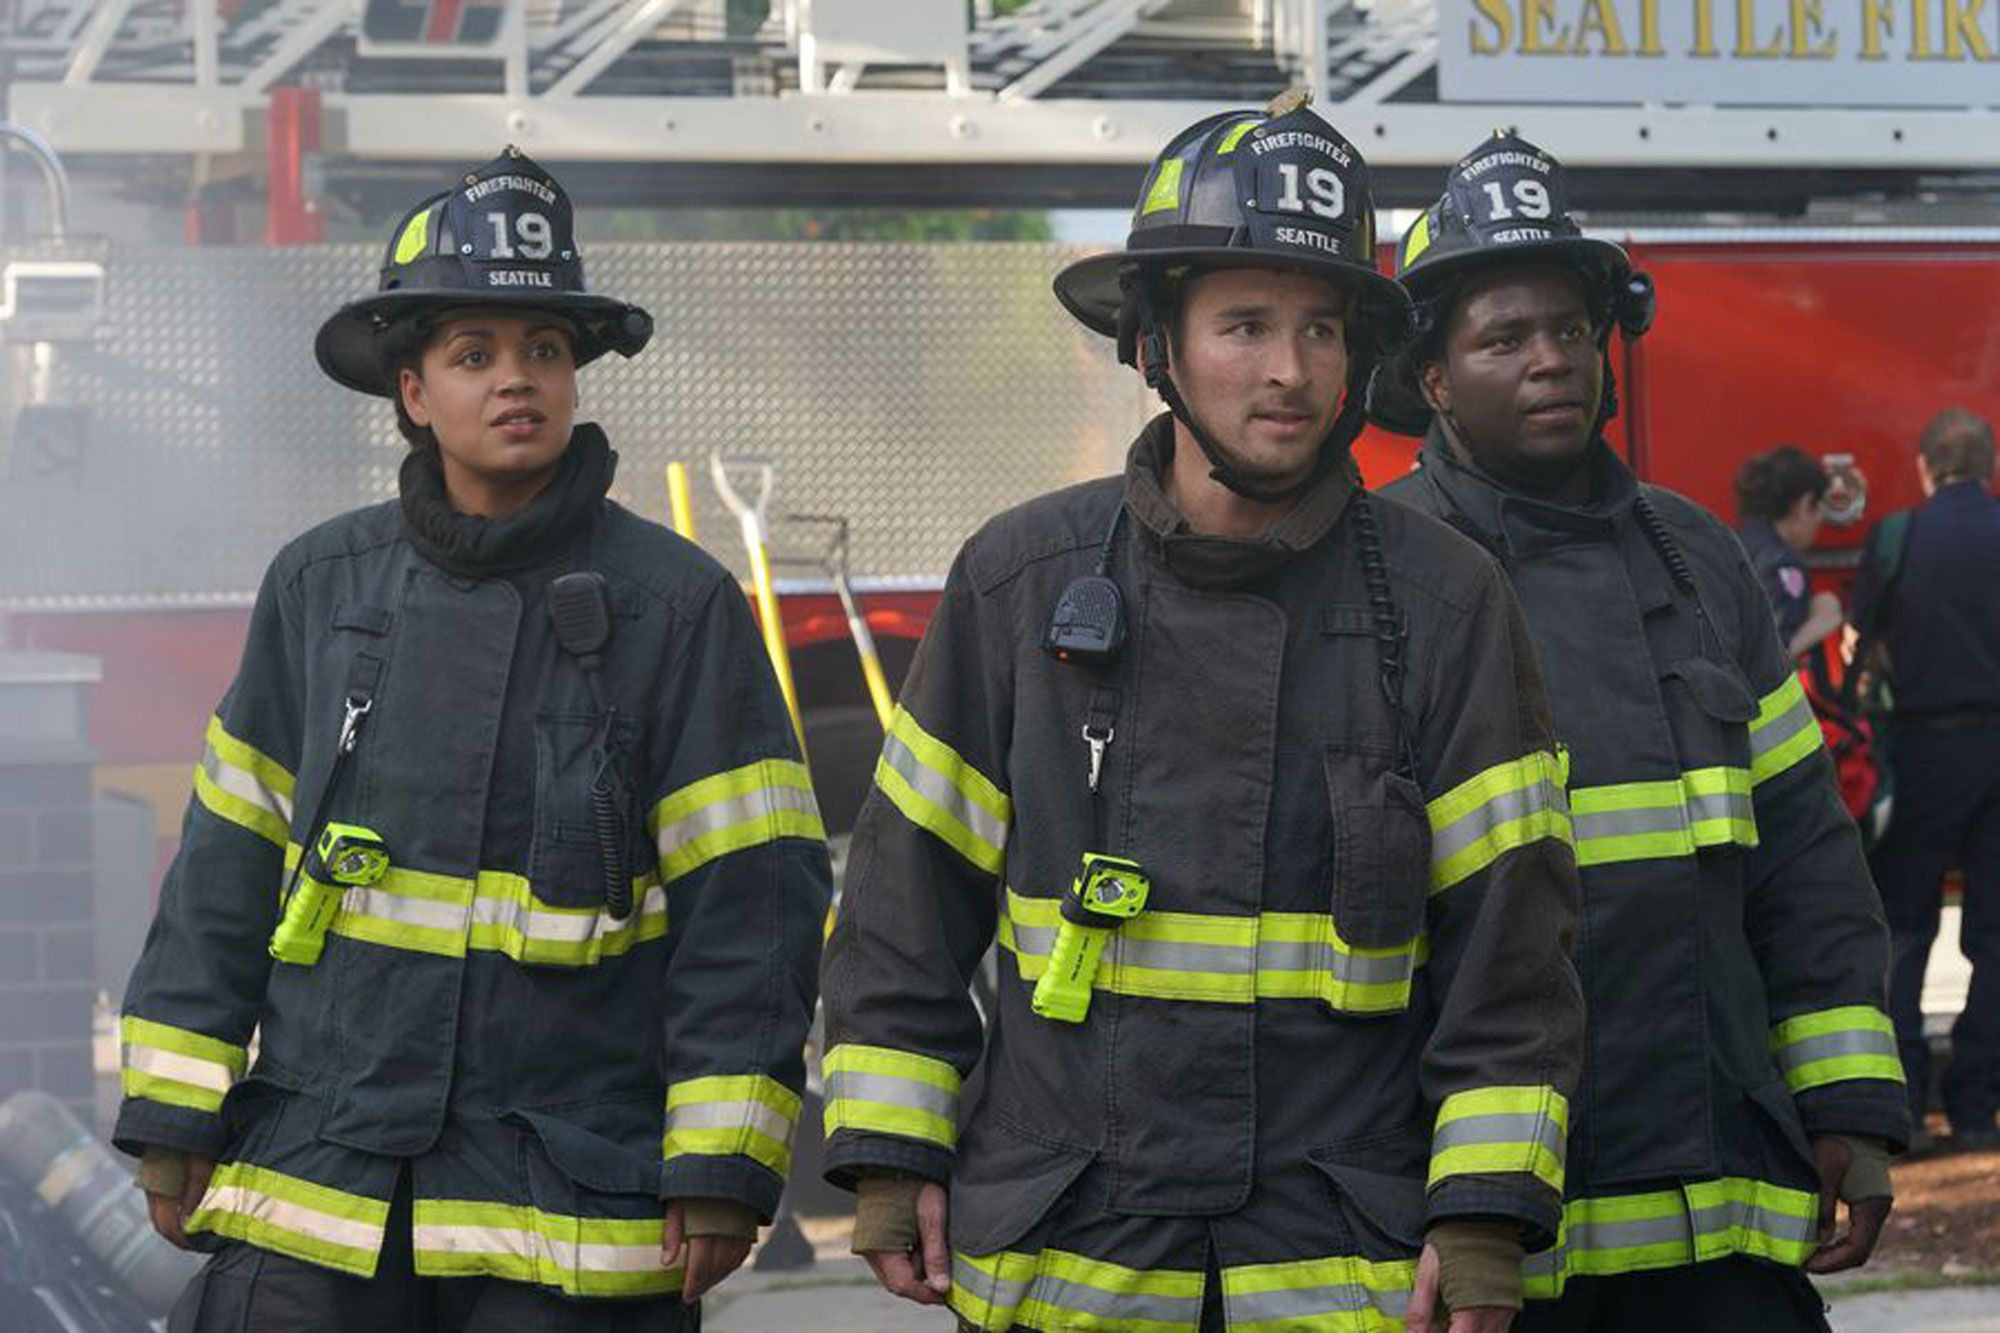 Station 19 season 4: Cast, air date, spoilers and more